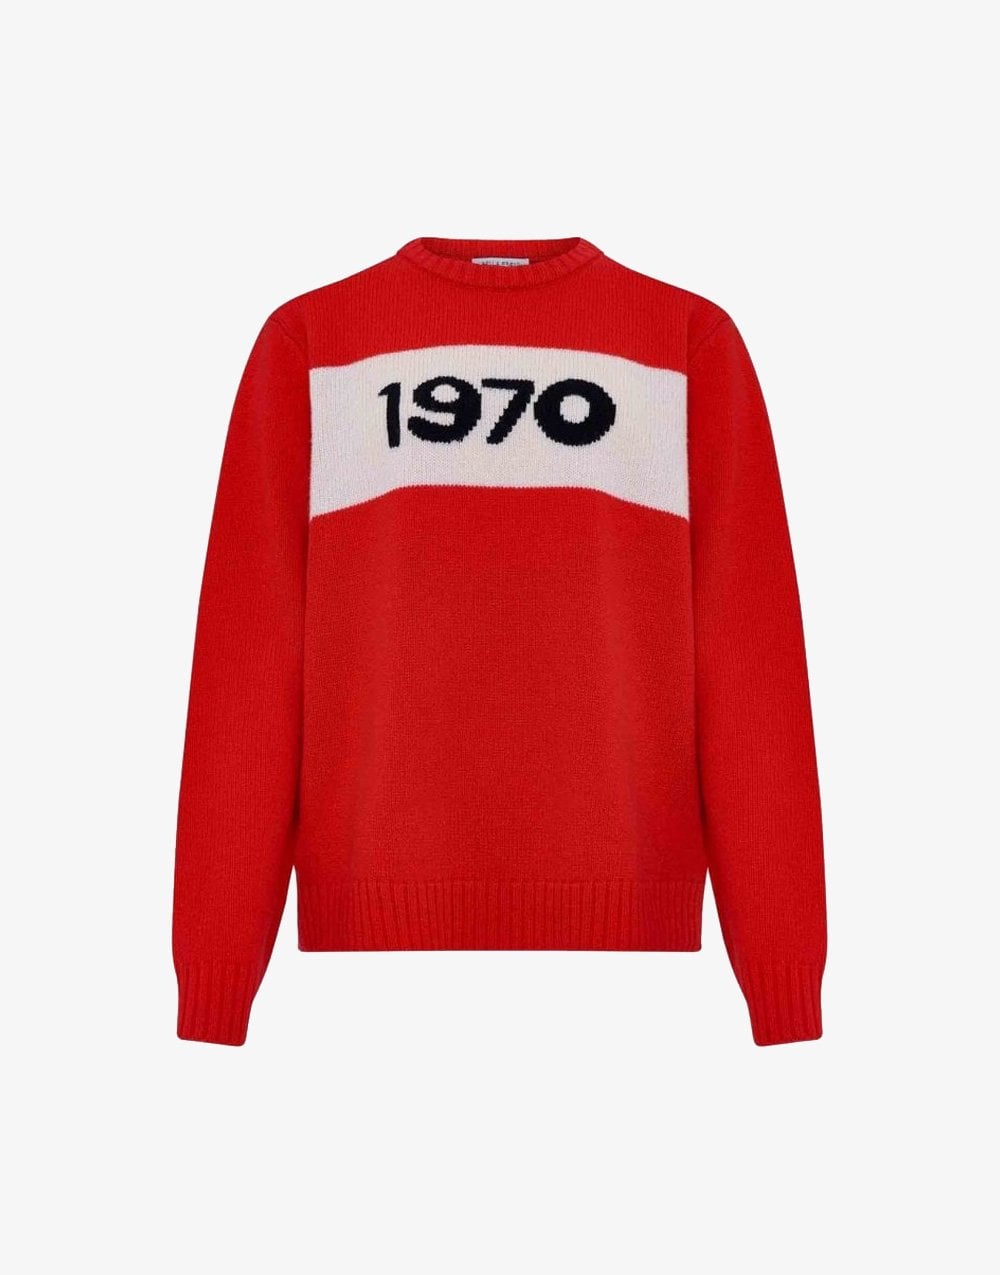 Bella Freud  1970 Oversized Knitted Jumper Size: L, Col: Red